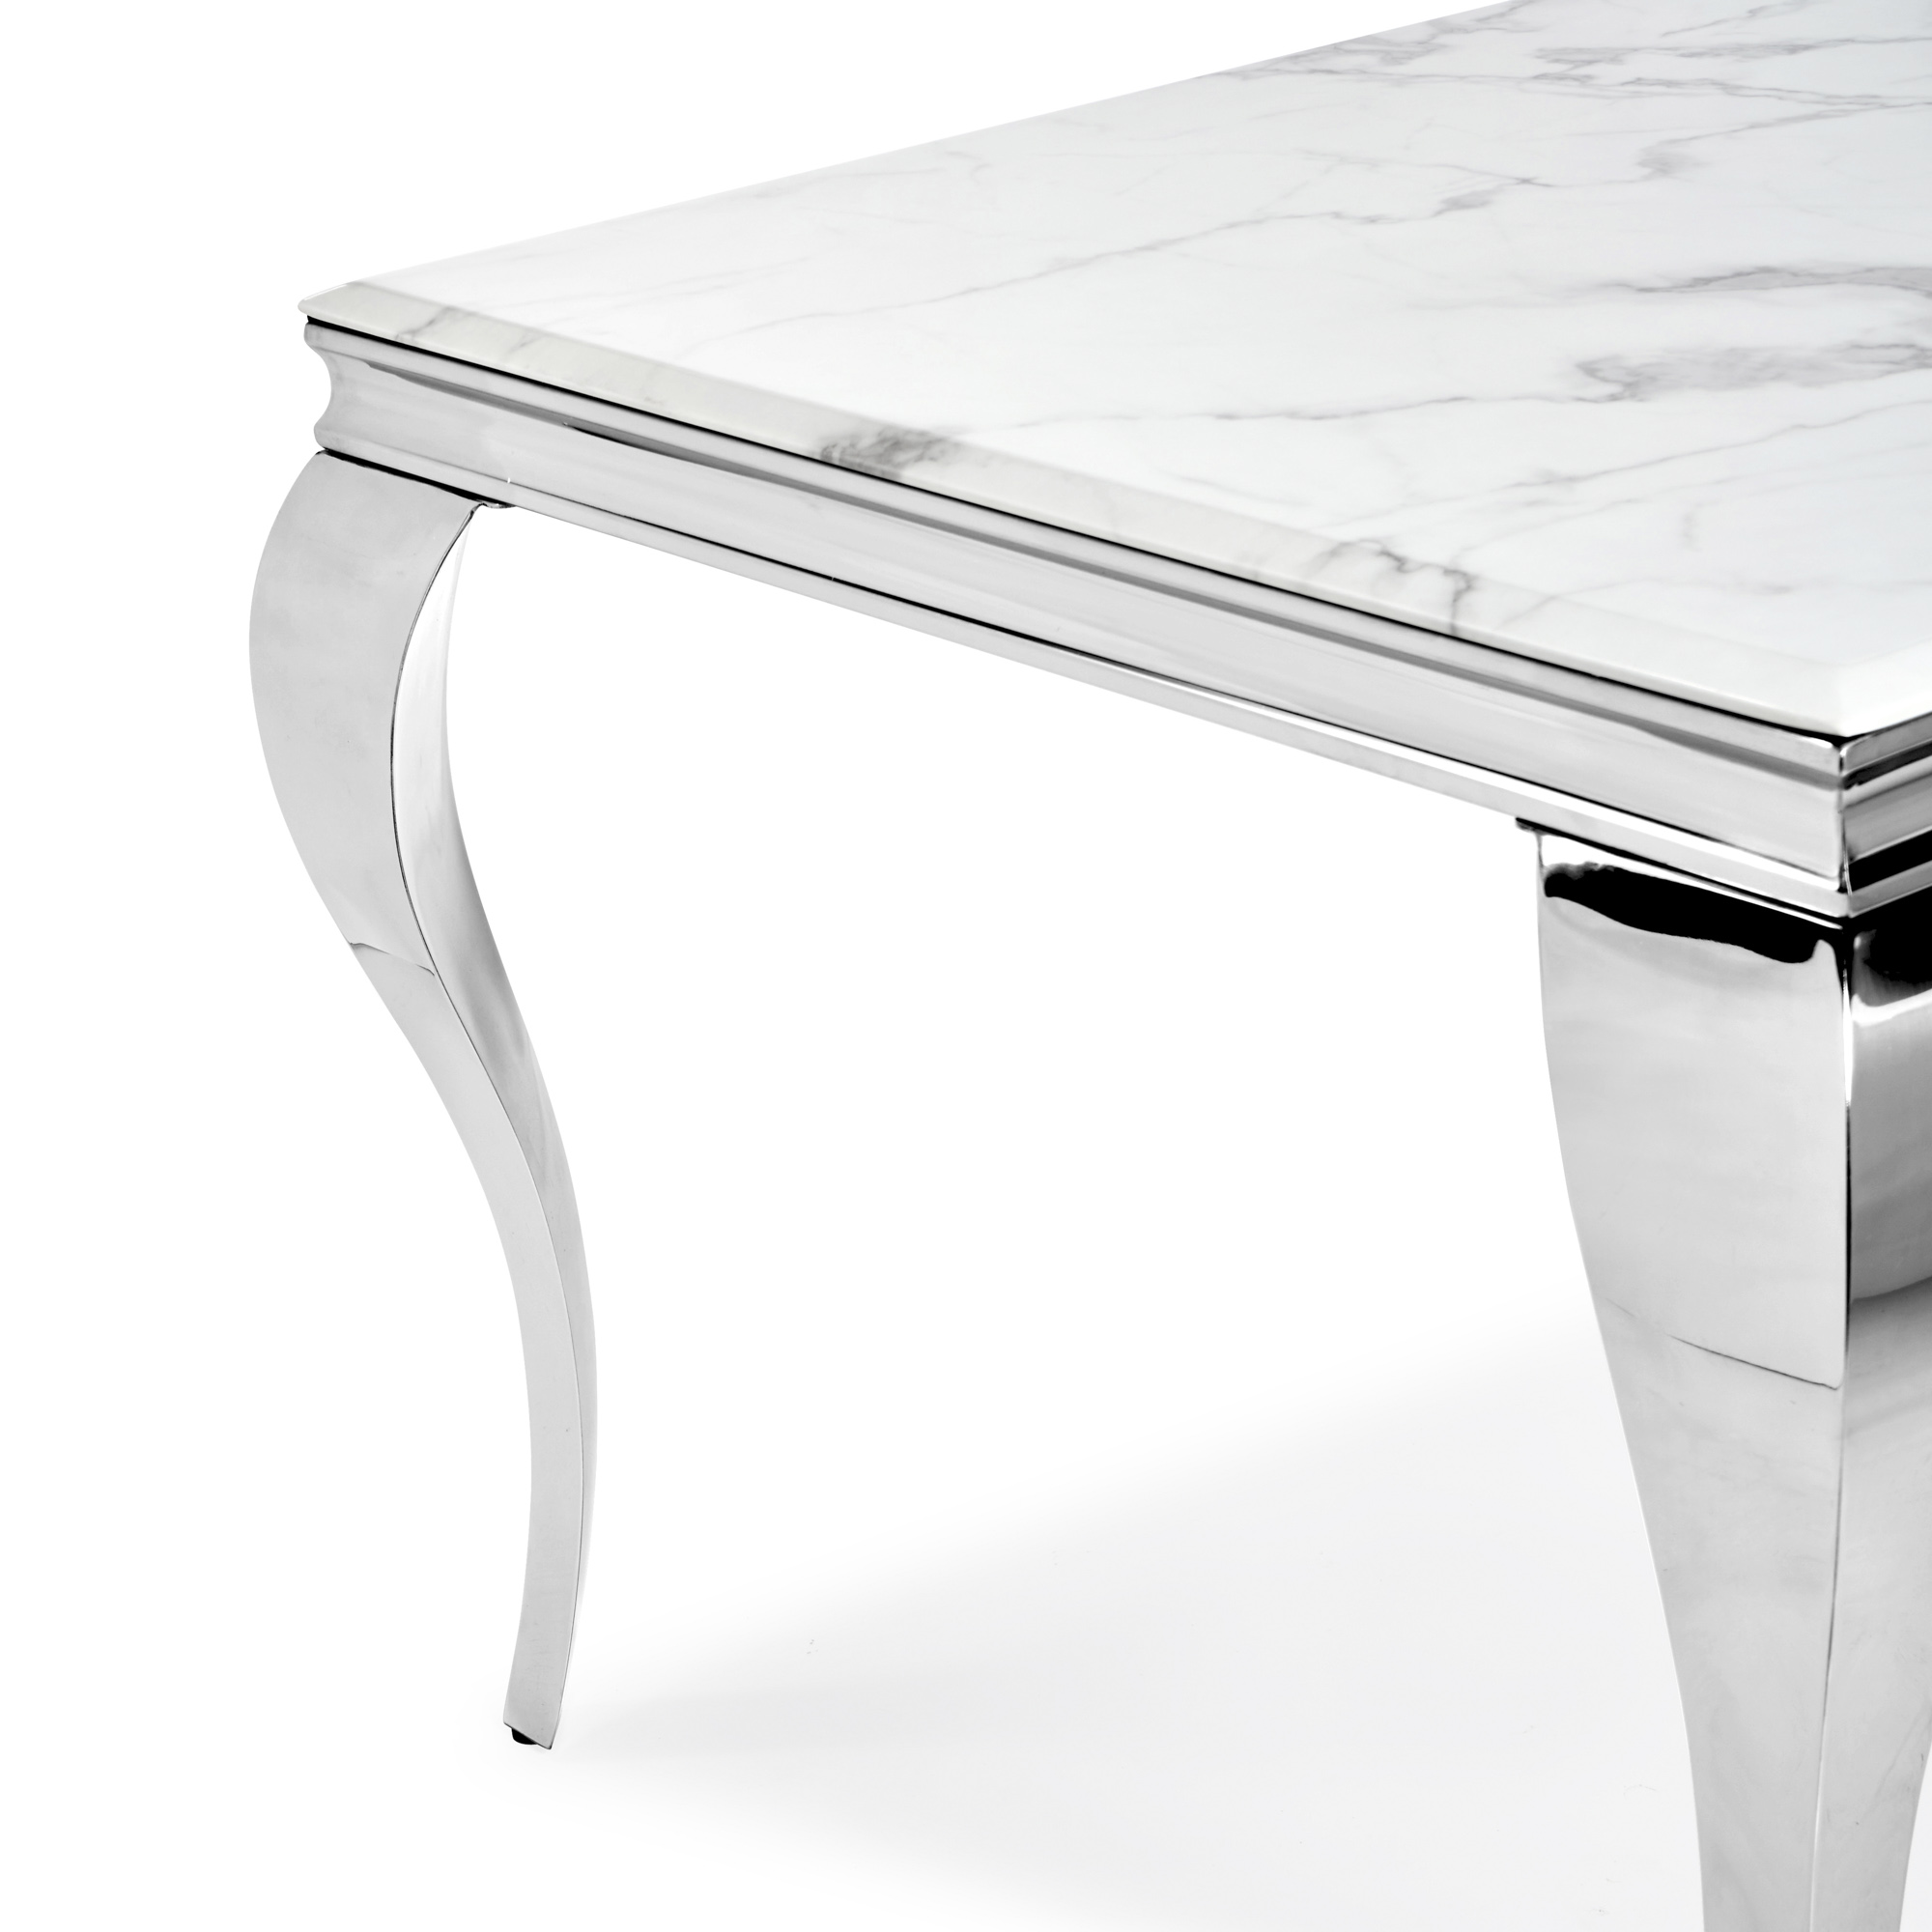 1.8m Louis Dining Table in Polished Steel with White Marble Top